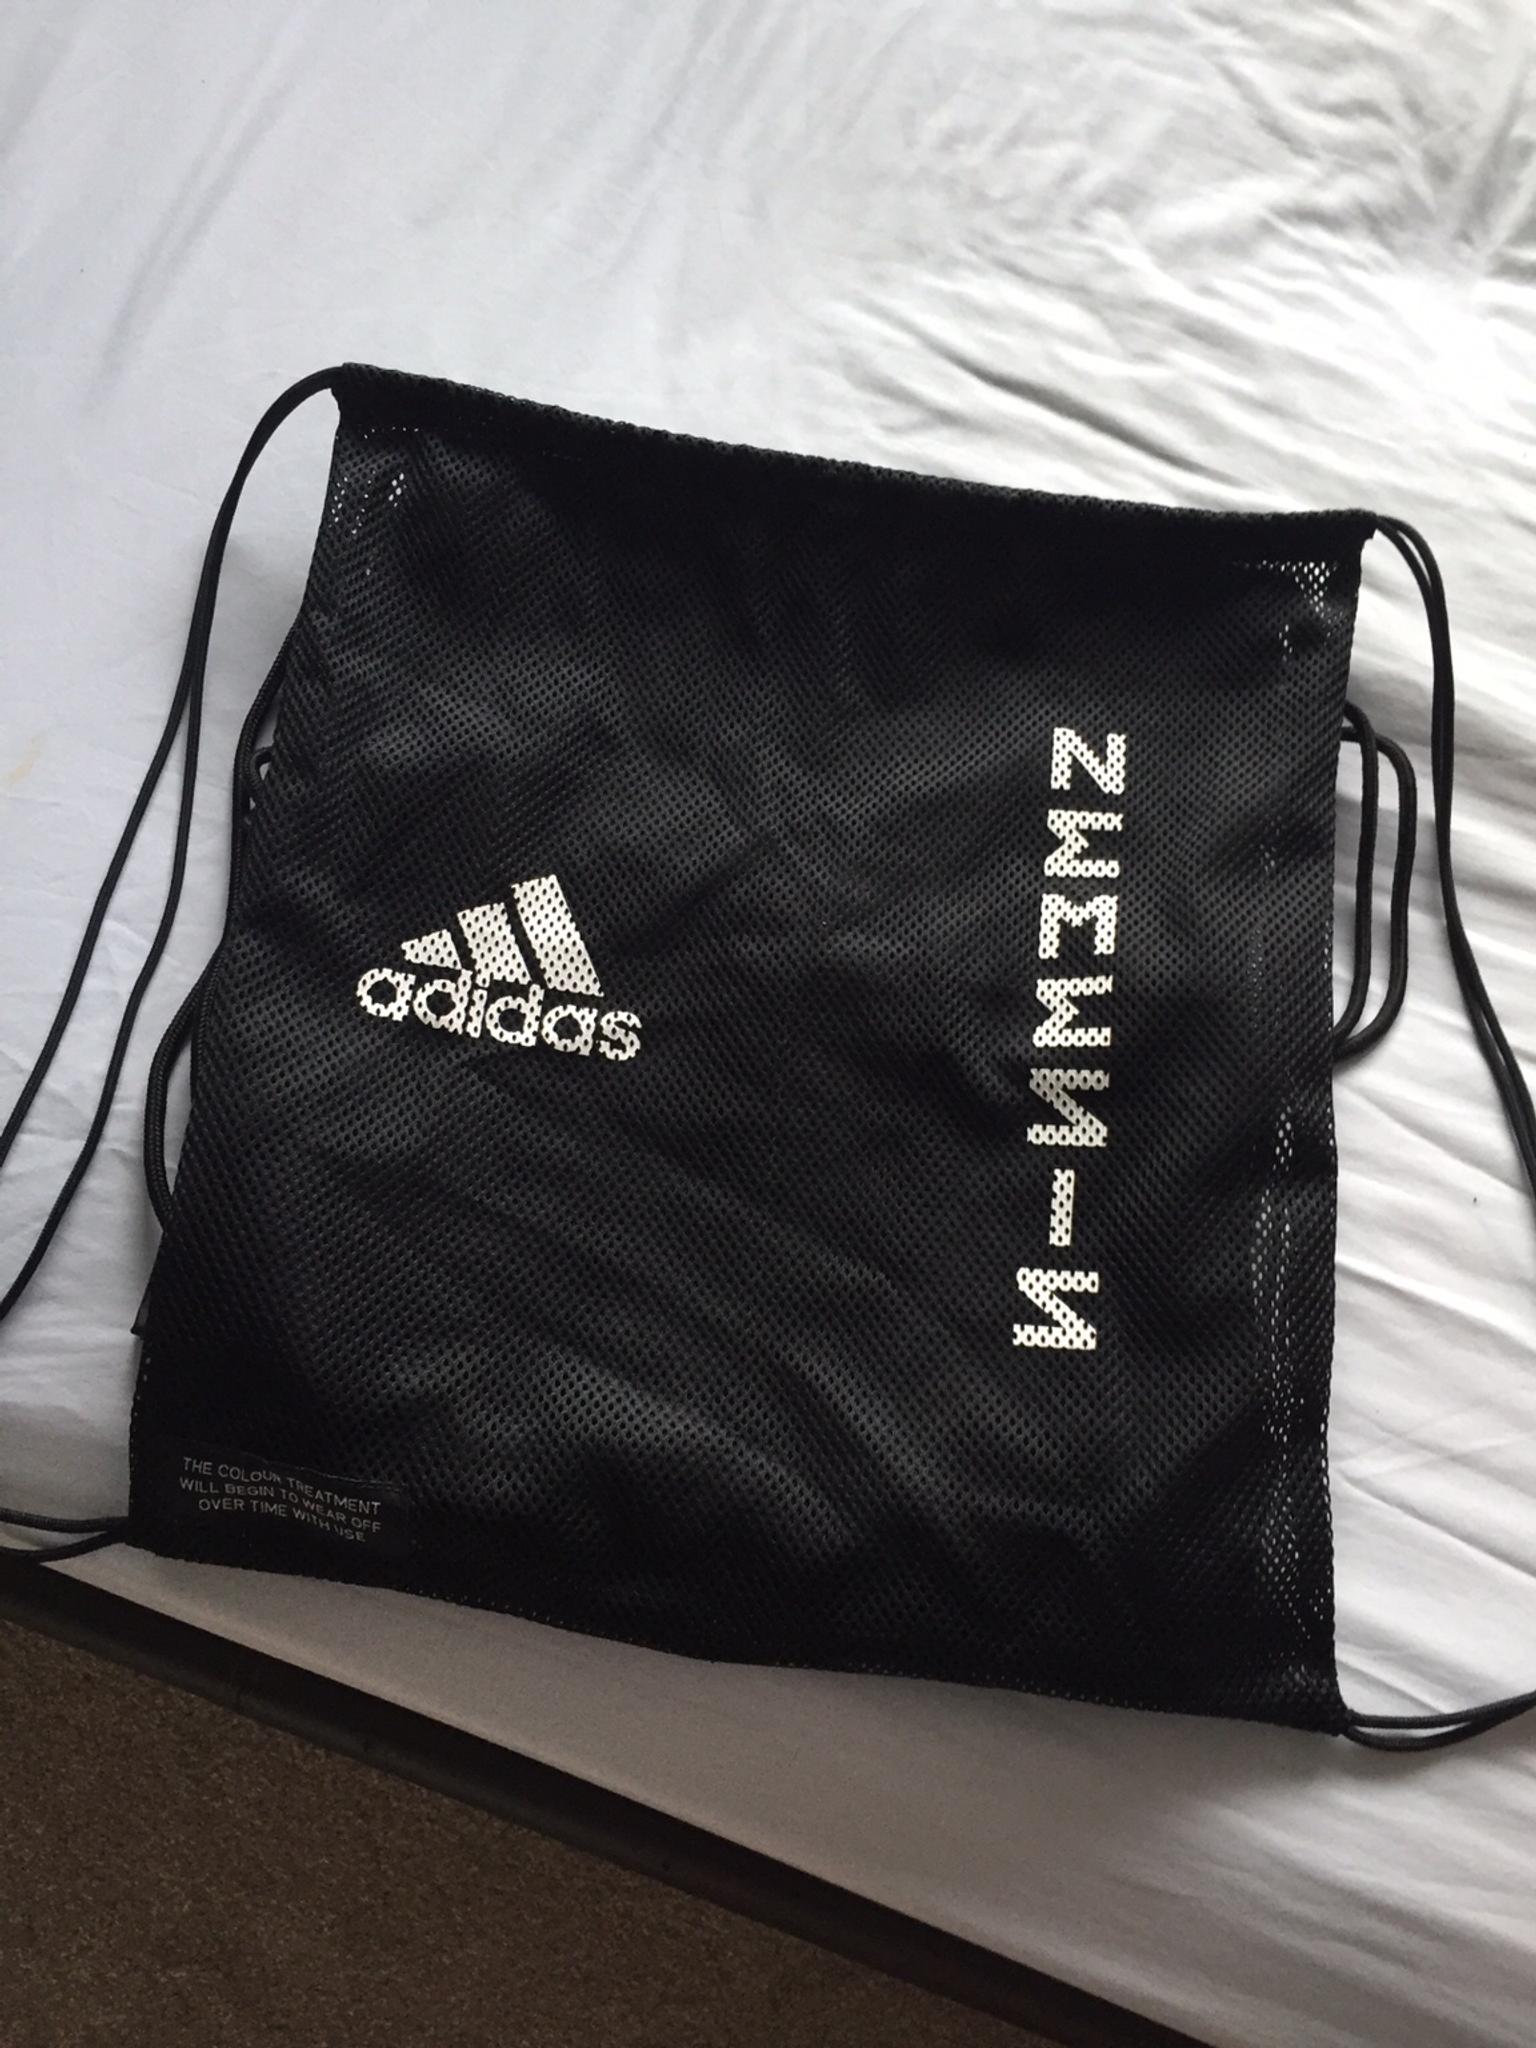 switch boot bag